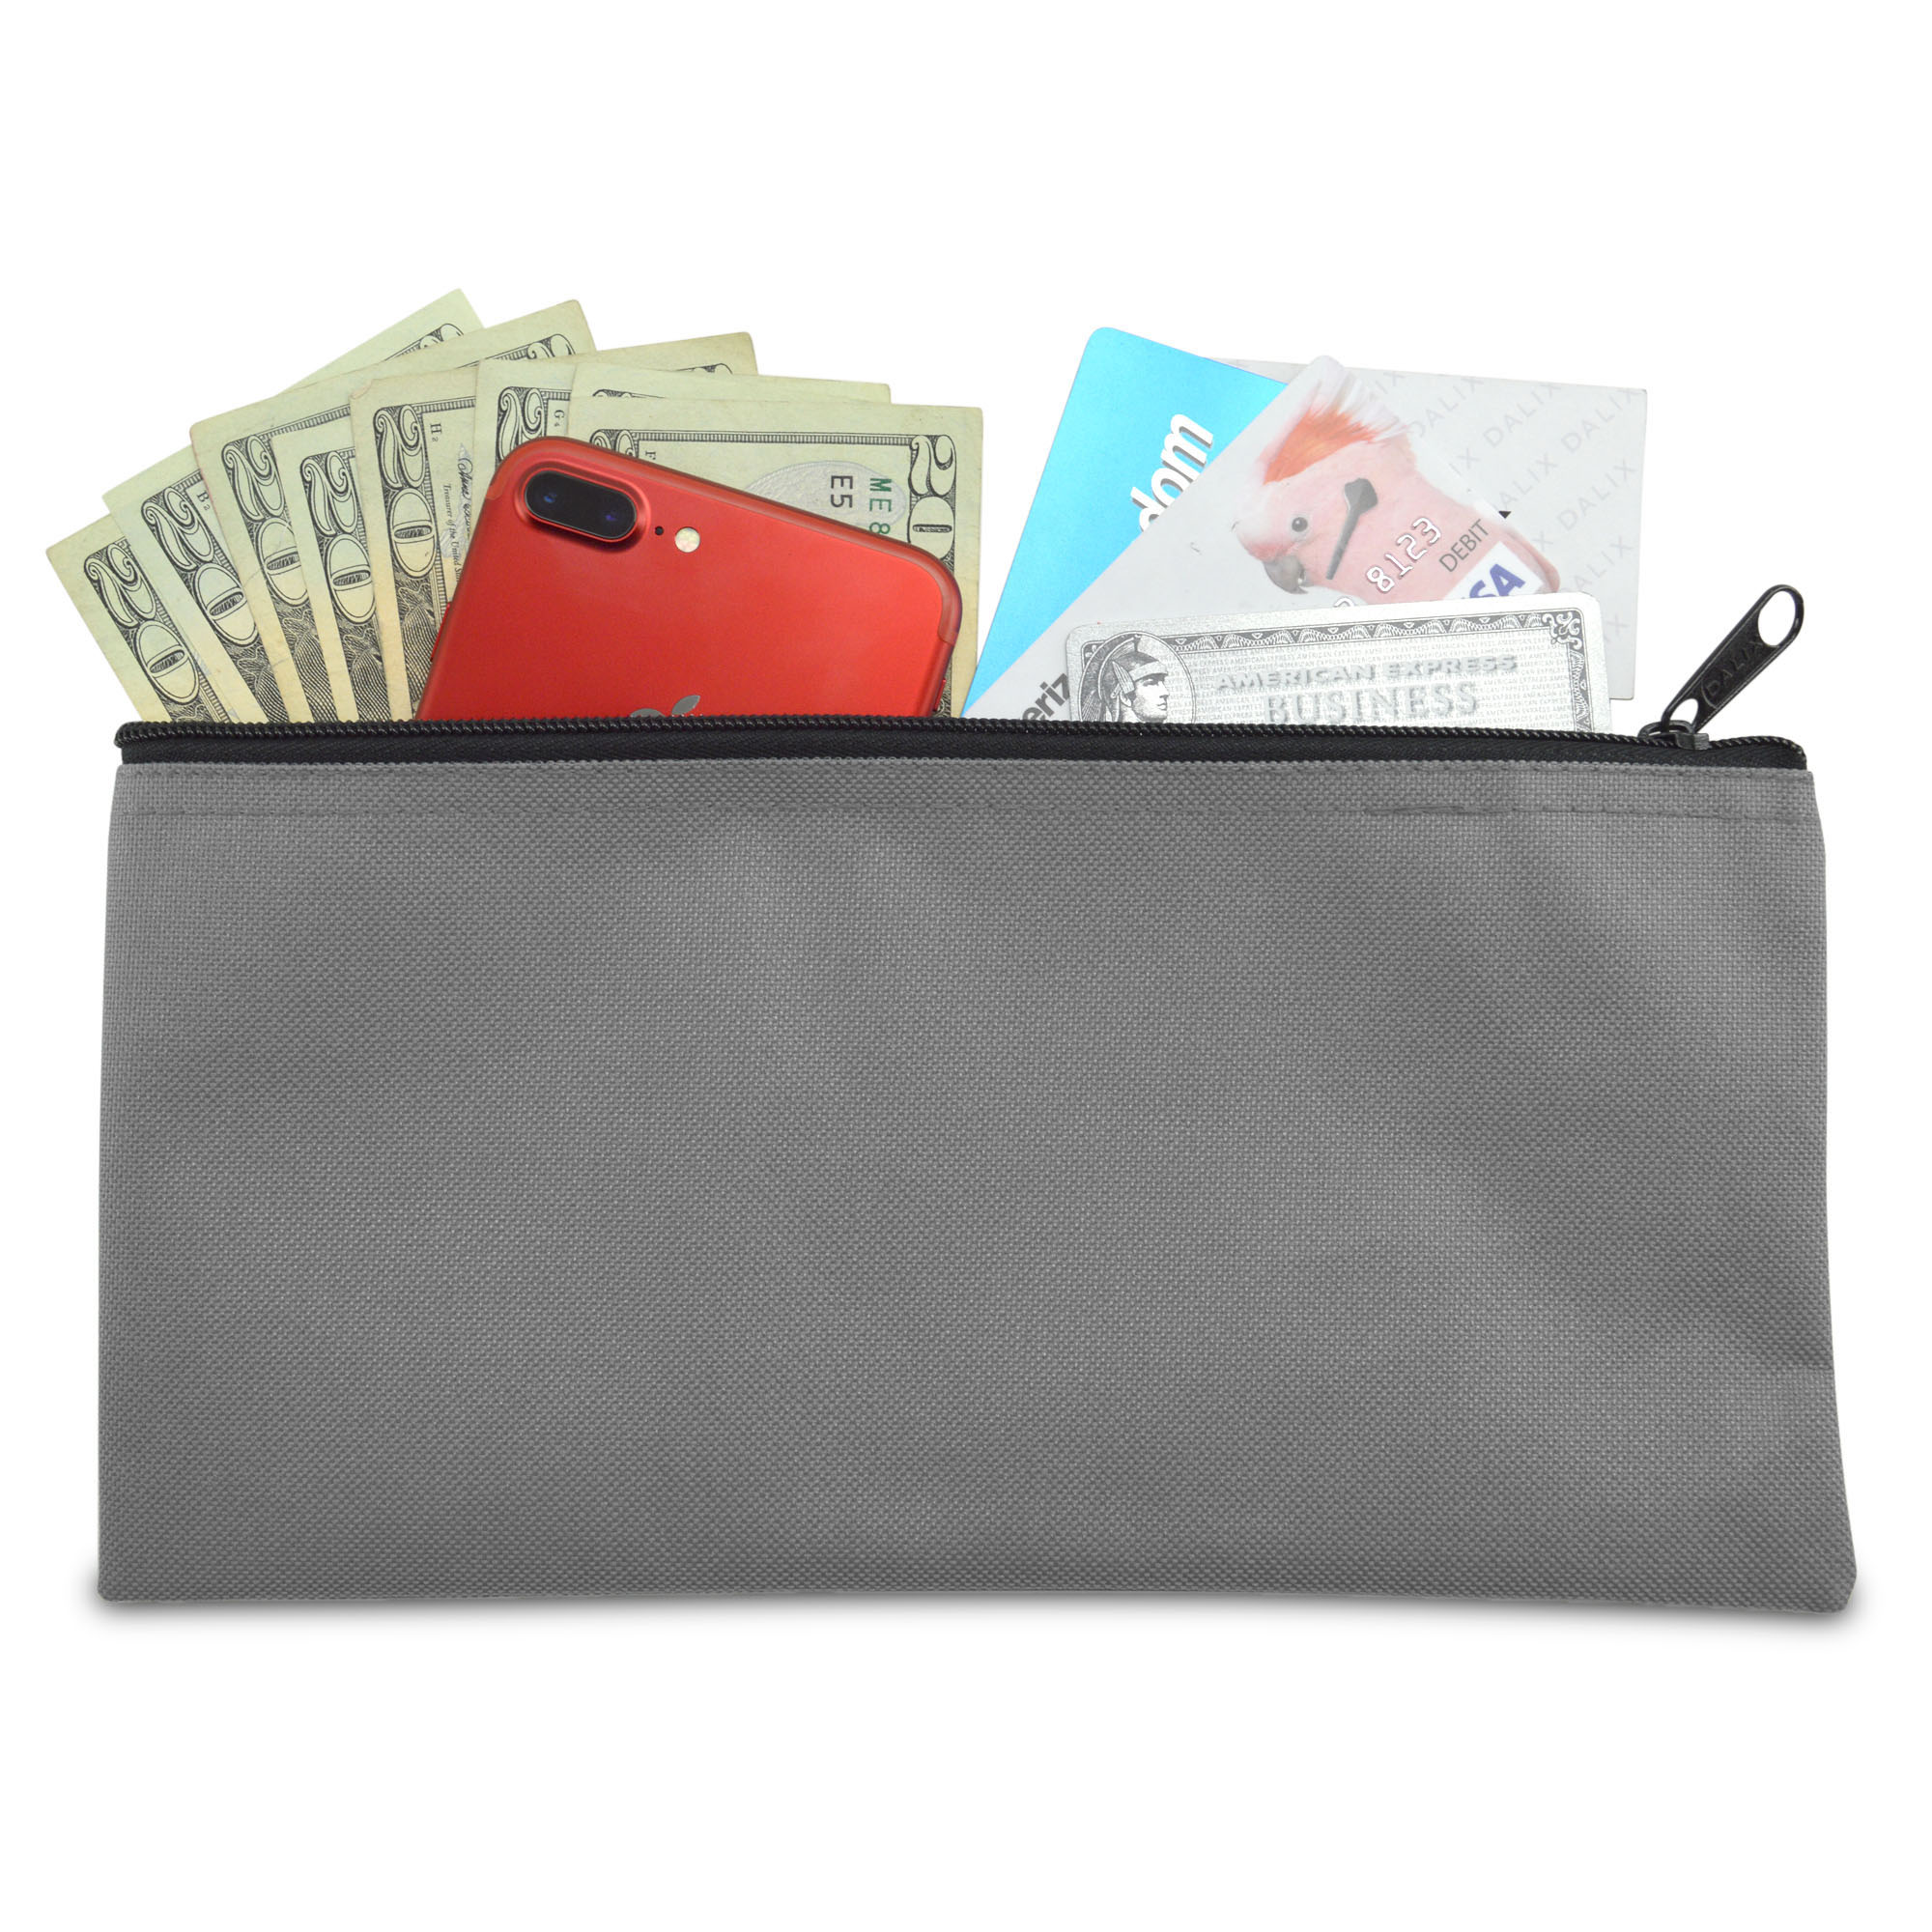 Multi Layer PU Leather Wallet For Women With Ikea Coin Purse, Card Holder,  Zipper Clutch Fashionable And Functional Fold Bag From Ejuhua, $12.26 |  DHgate.Com